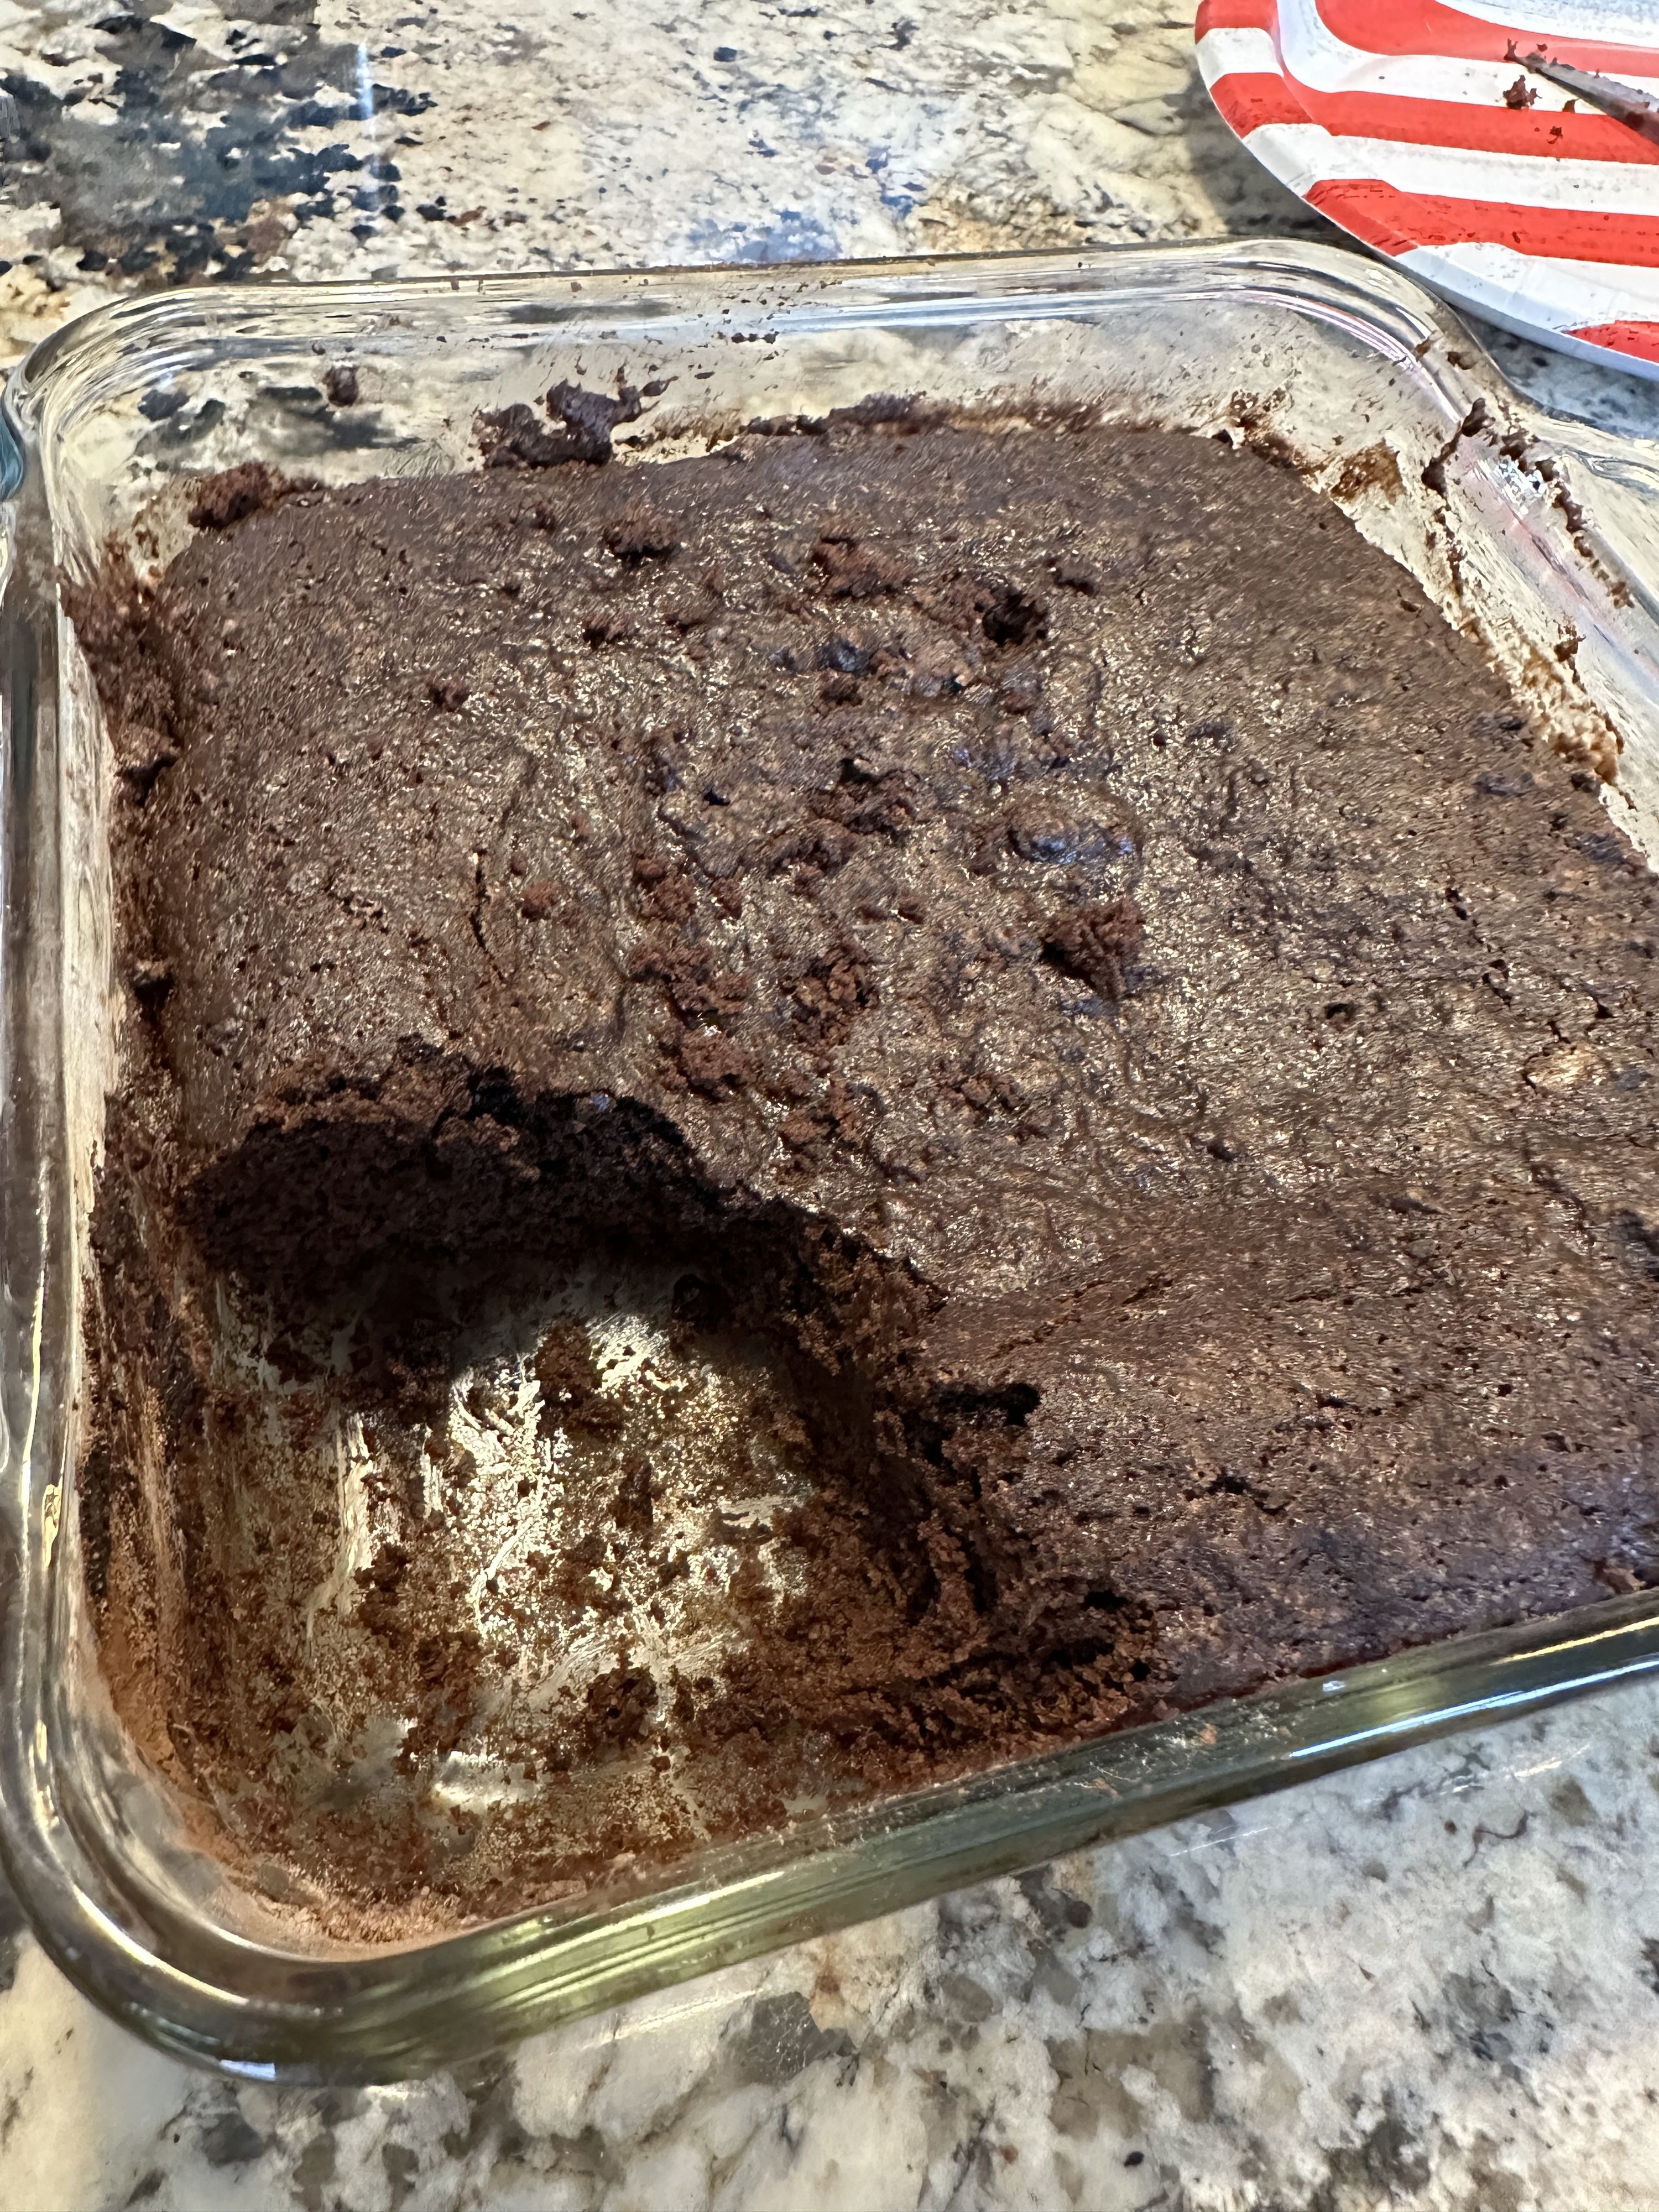 a corner of the cake missing from its pan